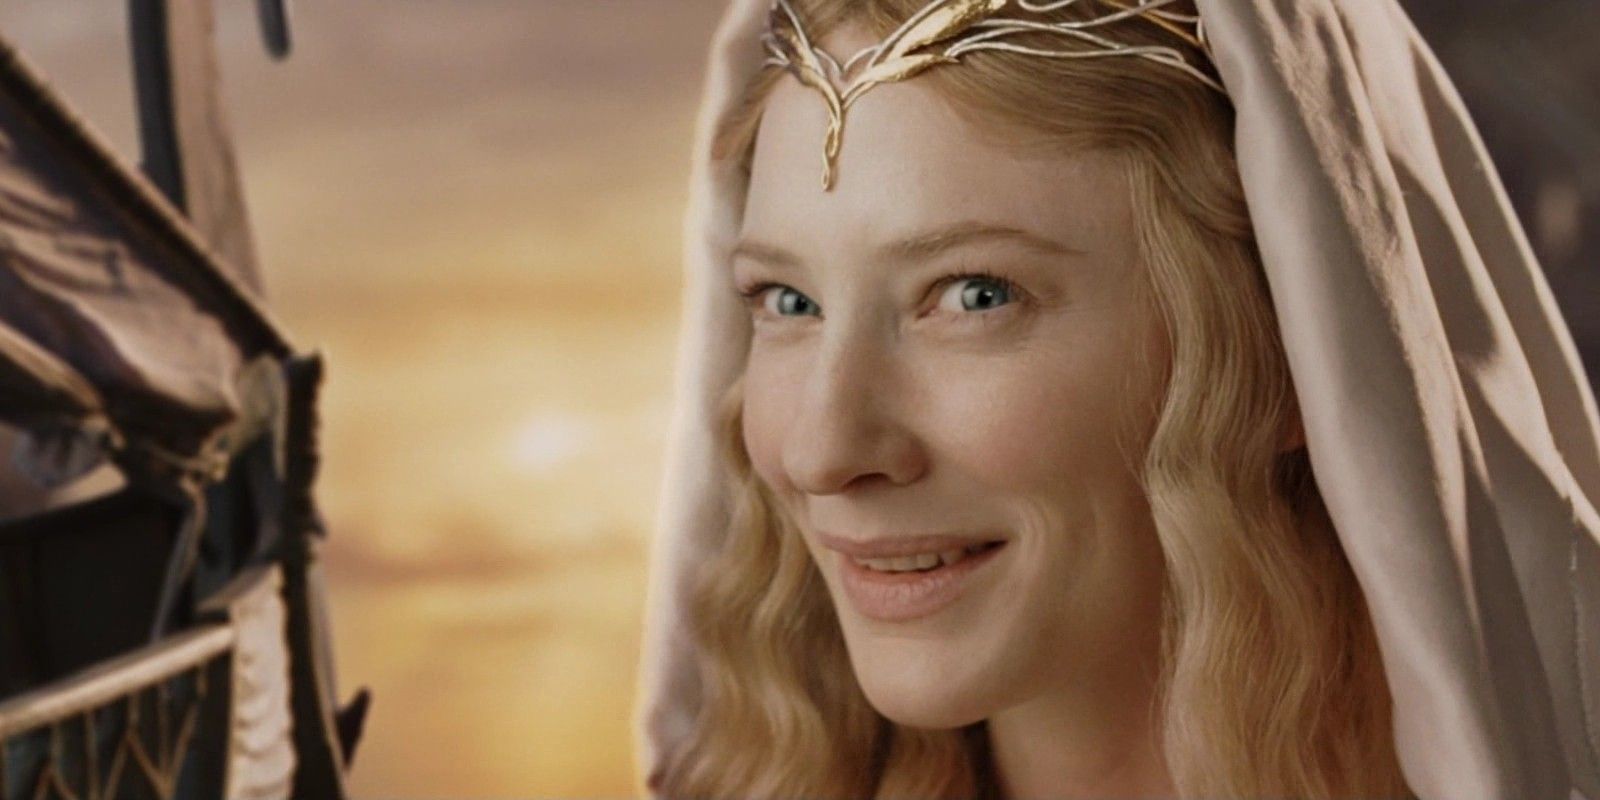 Cate Blanchett as Galadriel in The Lord of the Rings Return of the King